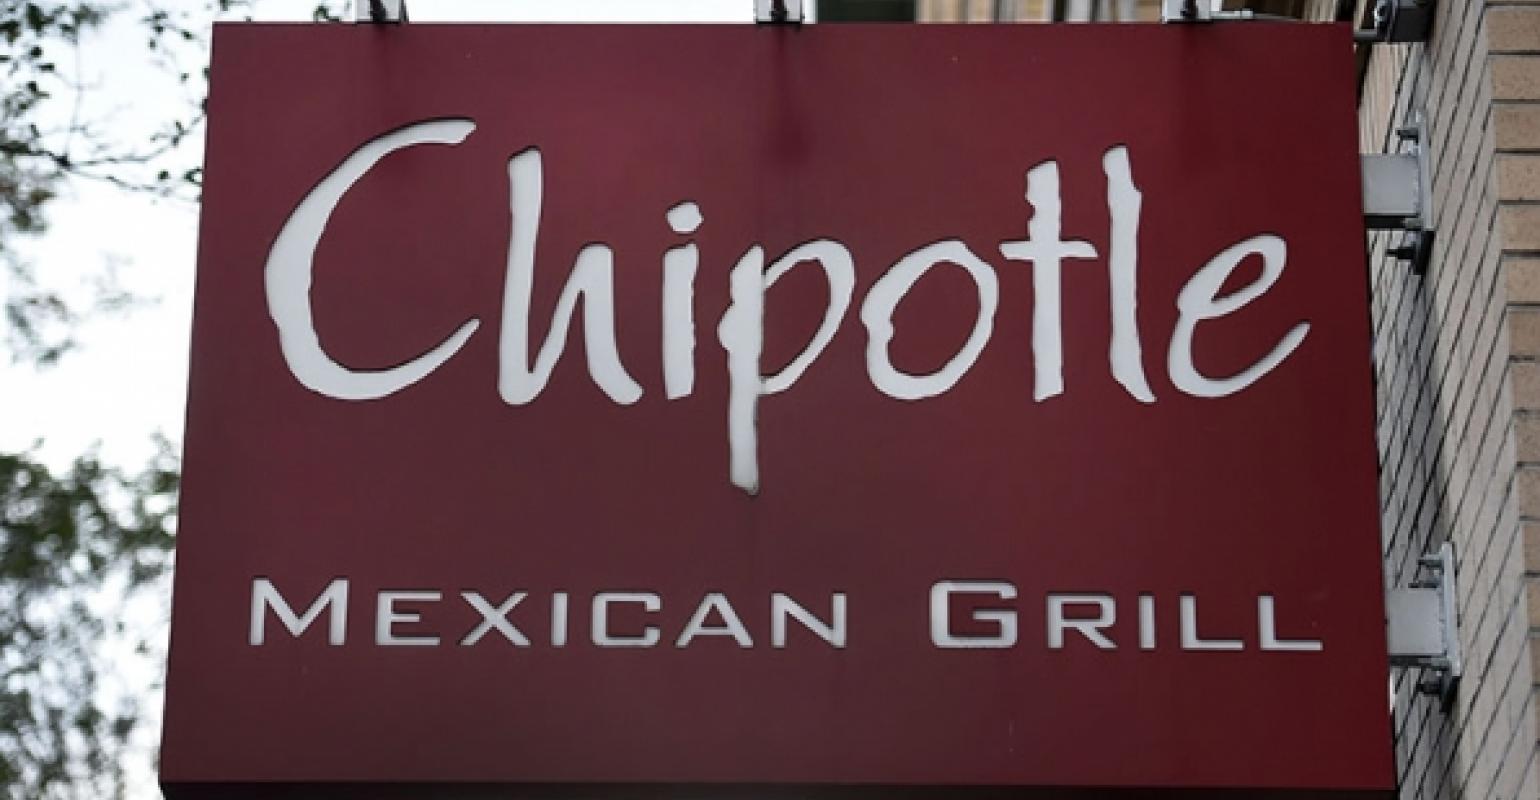 CDC Chipotle E. coli outbreaks appear to be over Nation's Restaurant